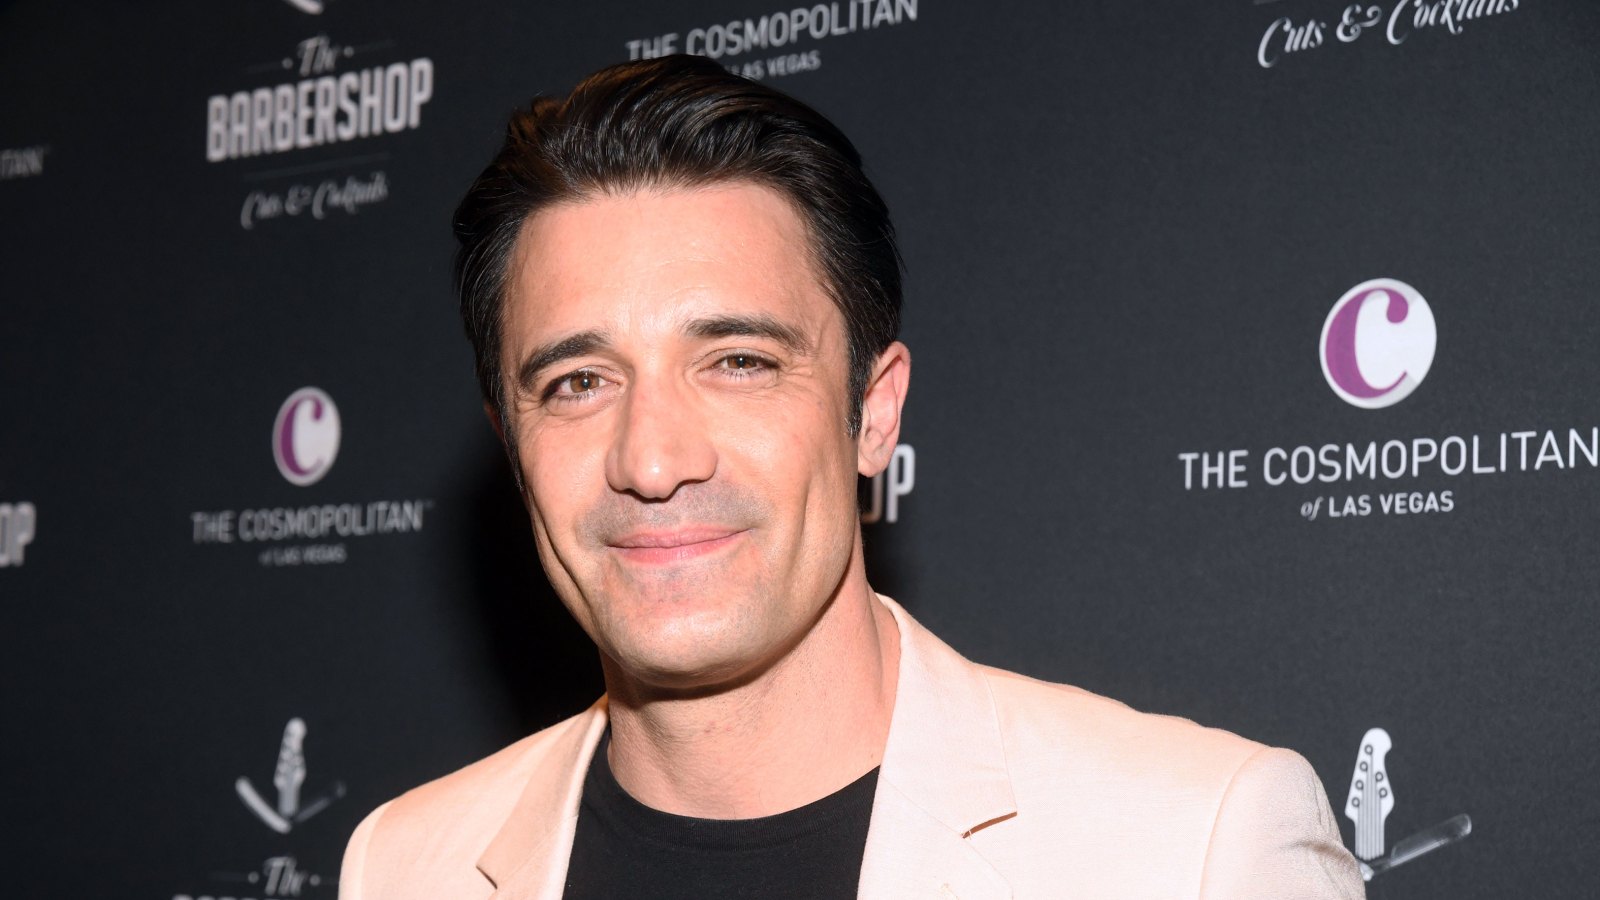 Gilles Marini Says He's 'Not going to throw any rocks' at Lori Loughlin